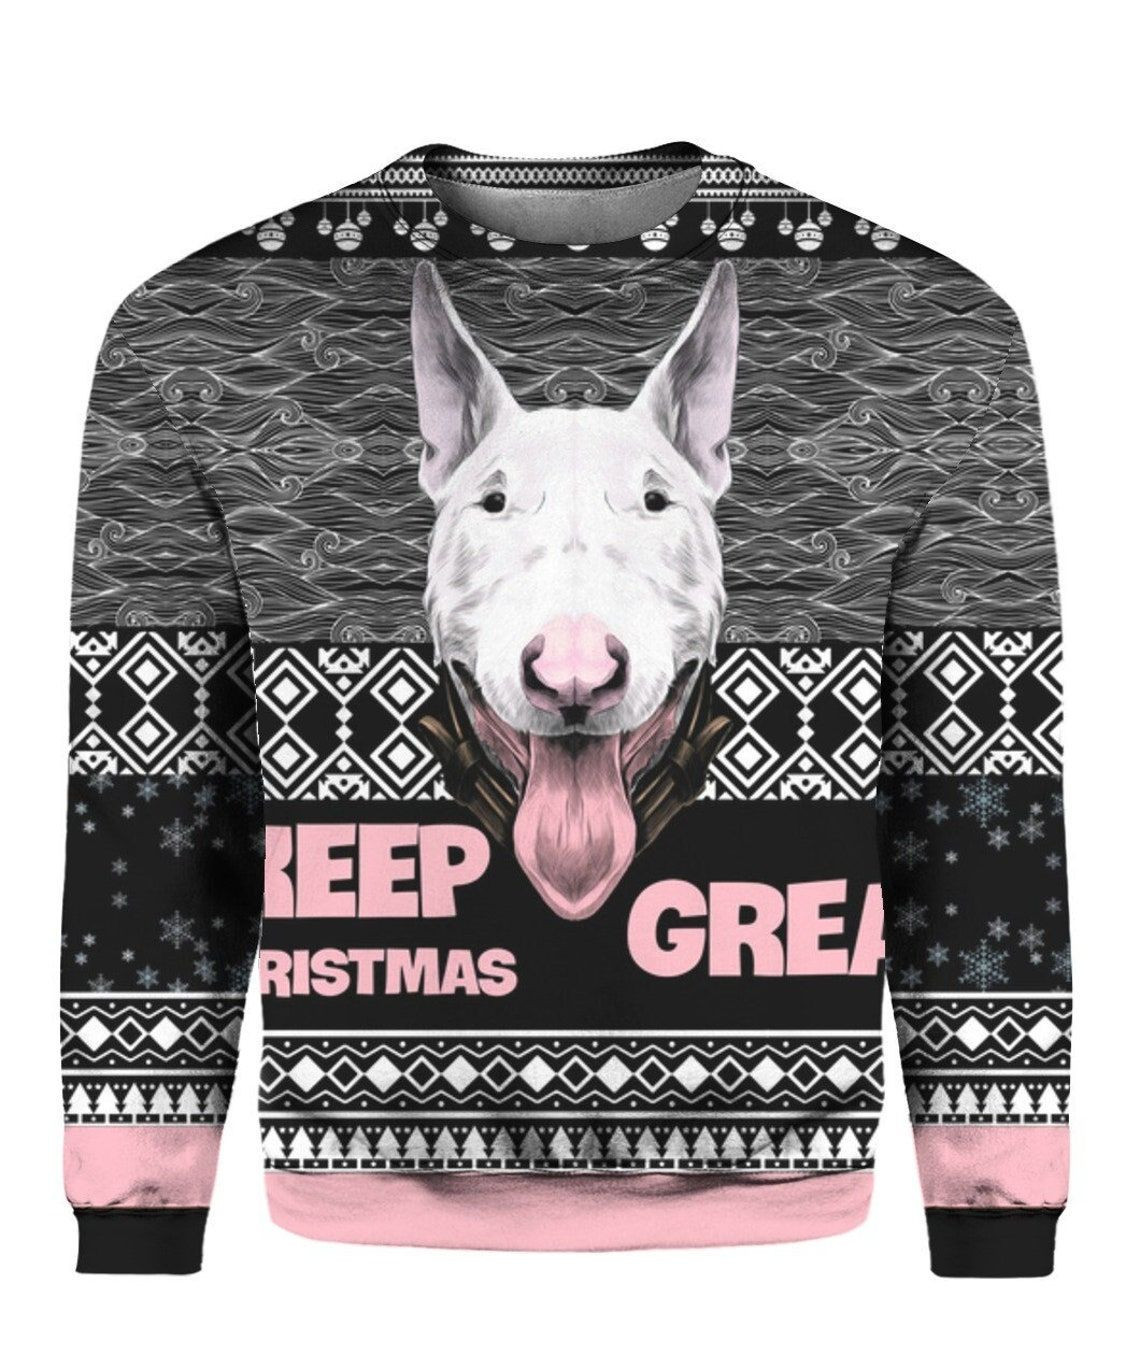 Bull Terrier Keep Christmas Great Ugly Christmas Sweater All Over